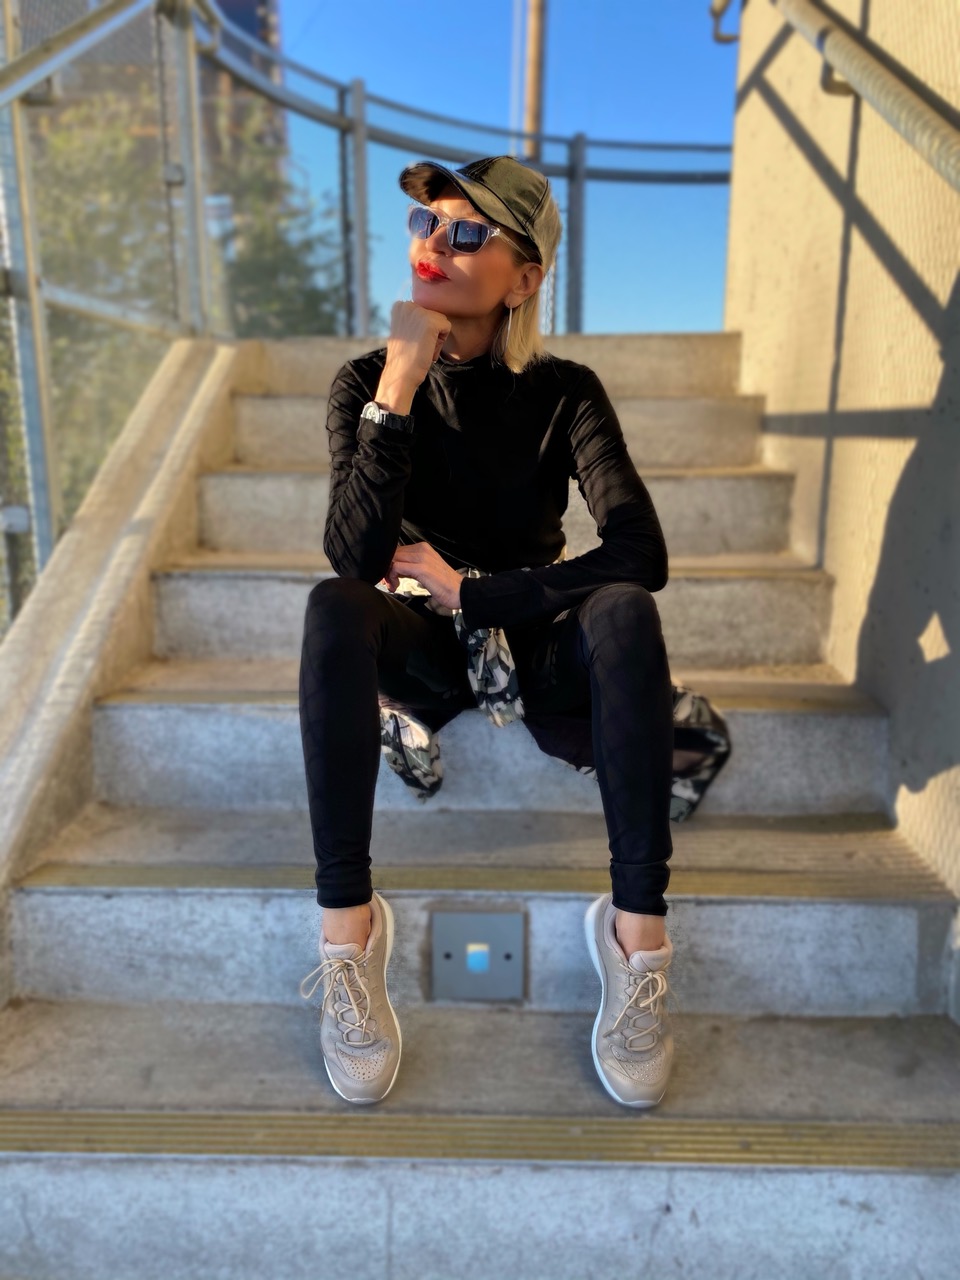 Lifestyle Influencer, Jamie Lewinger of More Than Turquoise, wearing the Debbie Allen Limited Edition walking shoe from Easy Spirit shoes